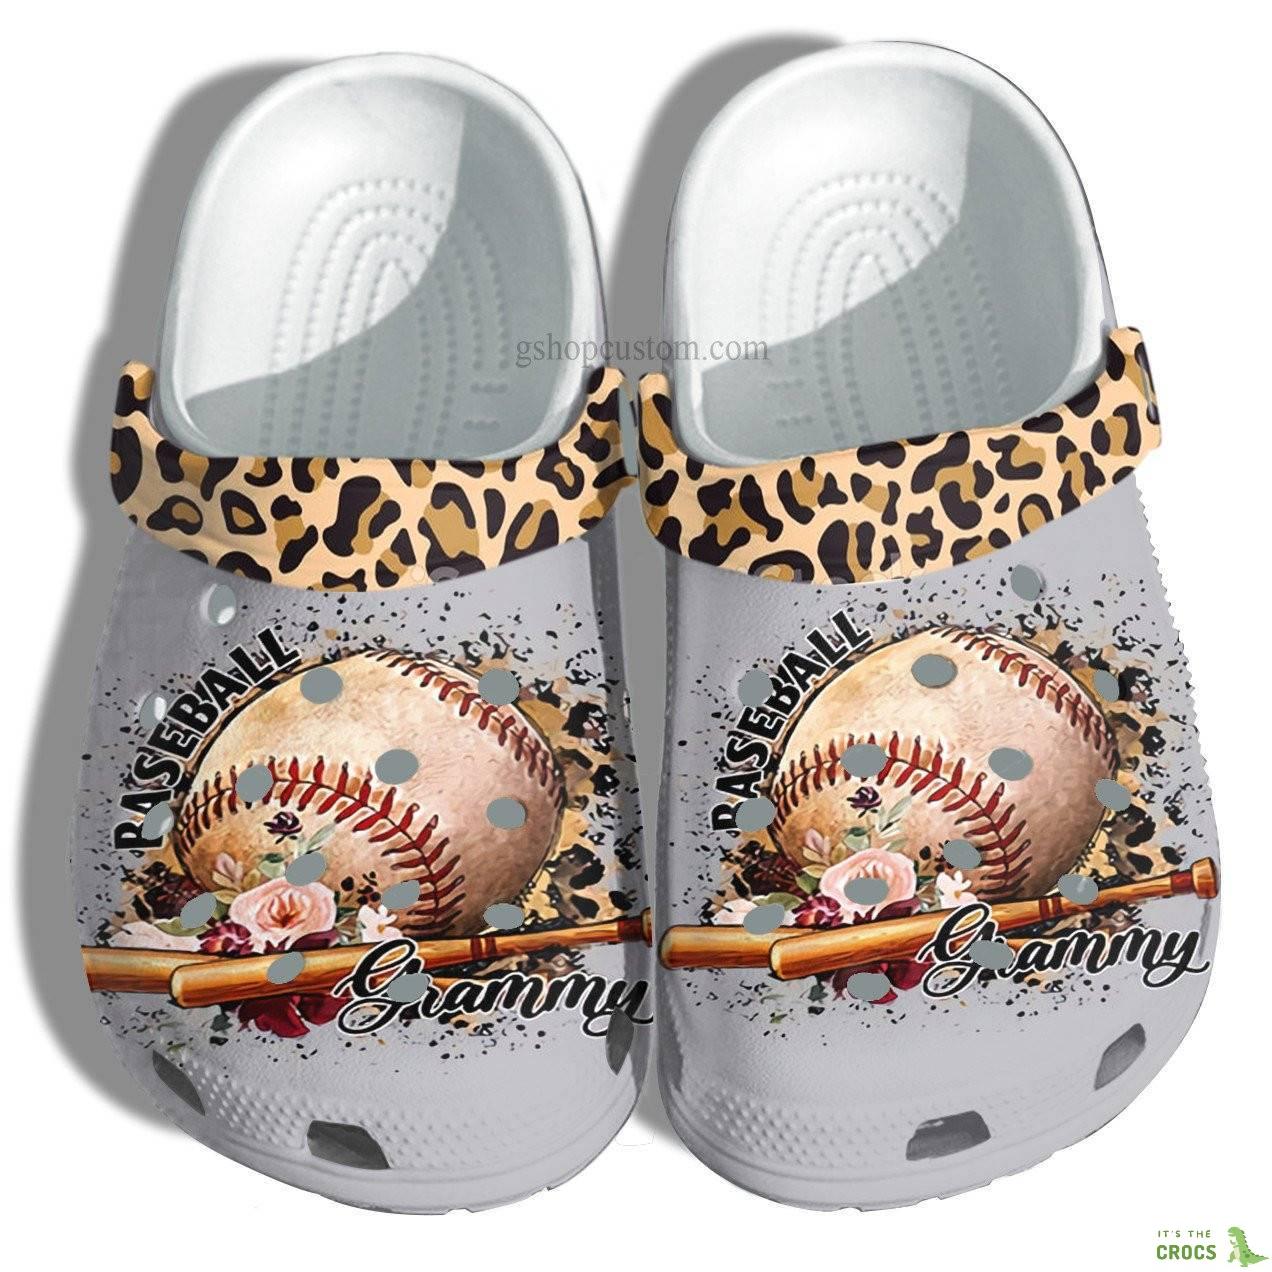 Baseball Grammy Leopard Skin Flower Crocs Shoes For Mother Day – Baseball Grandma Shoes Croc Clogs Customize Name